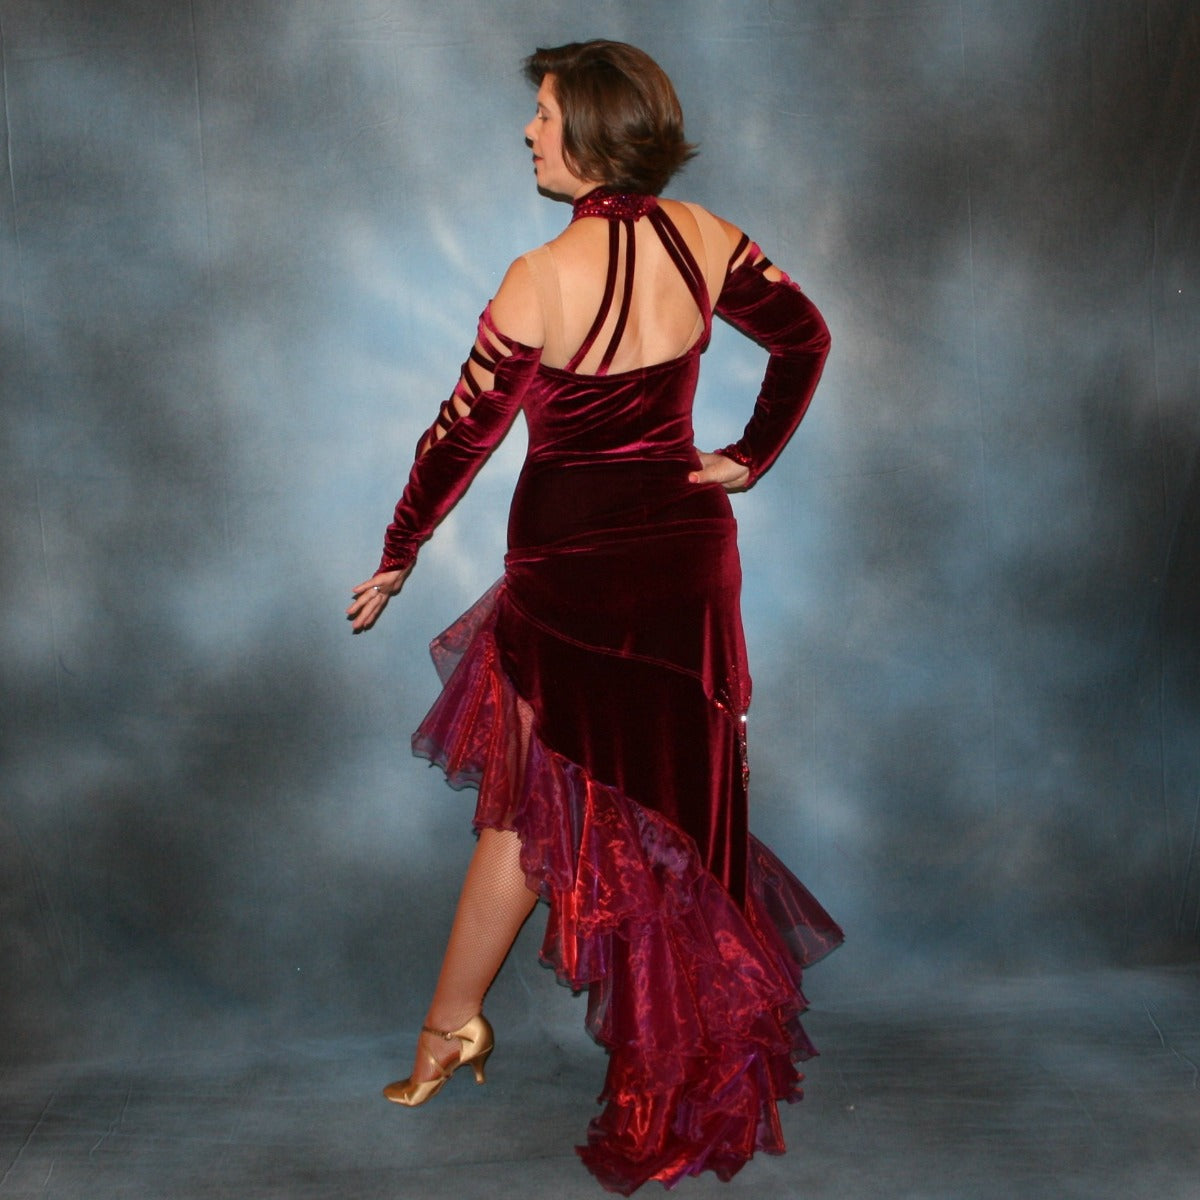 Crystal's Creations back view of Burgundy tango dress created in luxurious burgundy stretch velvet, with flounces of iridescent burgundy organza, adorned with fuchsia Swarovski rhinestones, hip sash has Swarovski hand beading as well, just recently embellished more.